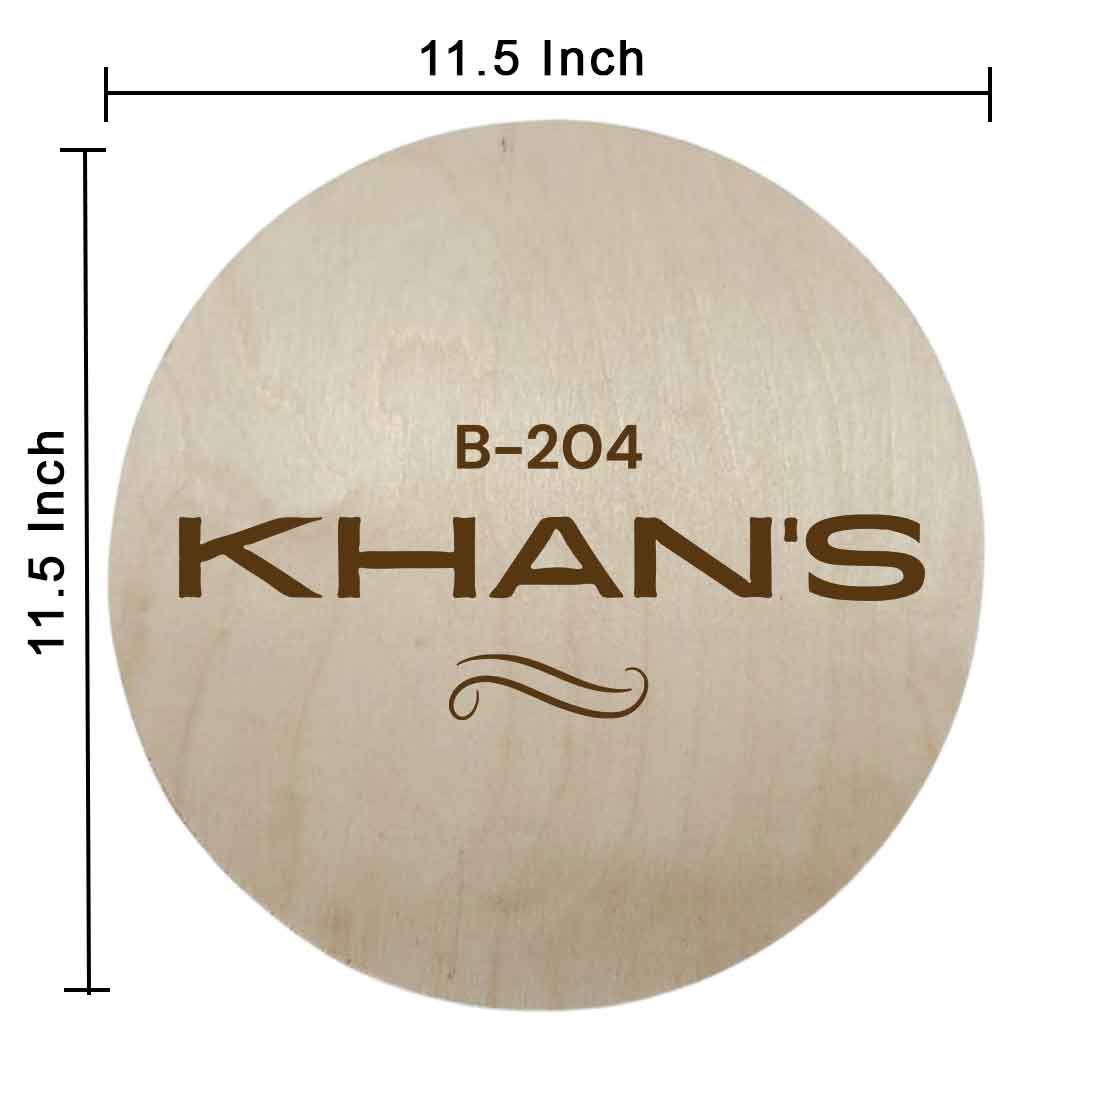 Personalised Engraved Wooden Name Plates for Door Entrance Round Name Board